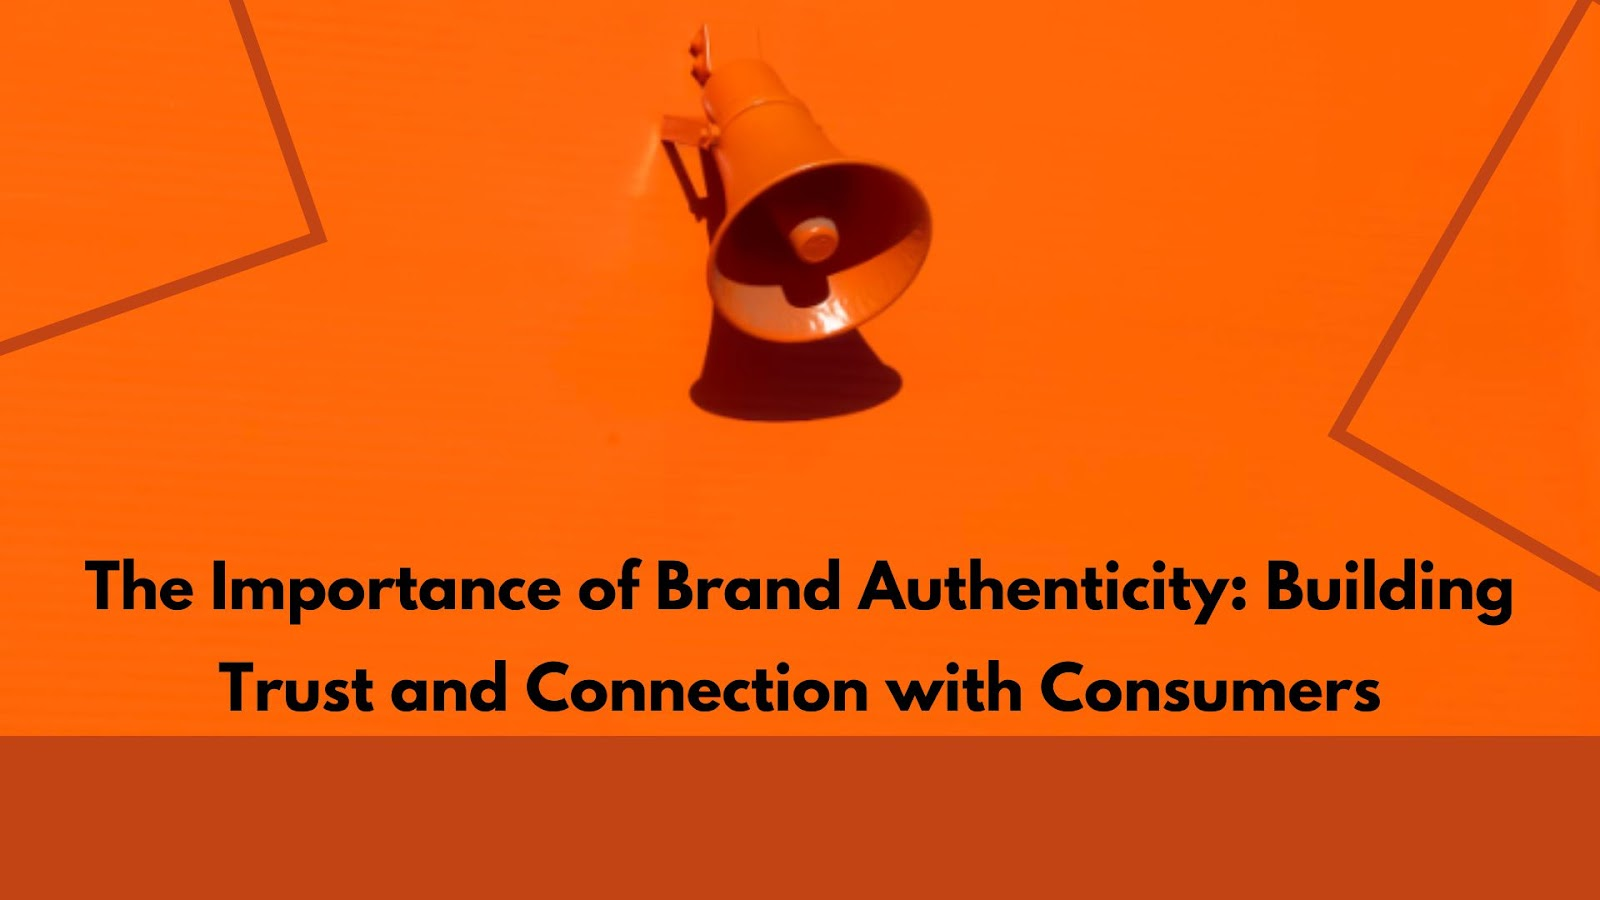 The Importance of Brand Authenticity: Building Trust and Connection with Consumers